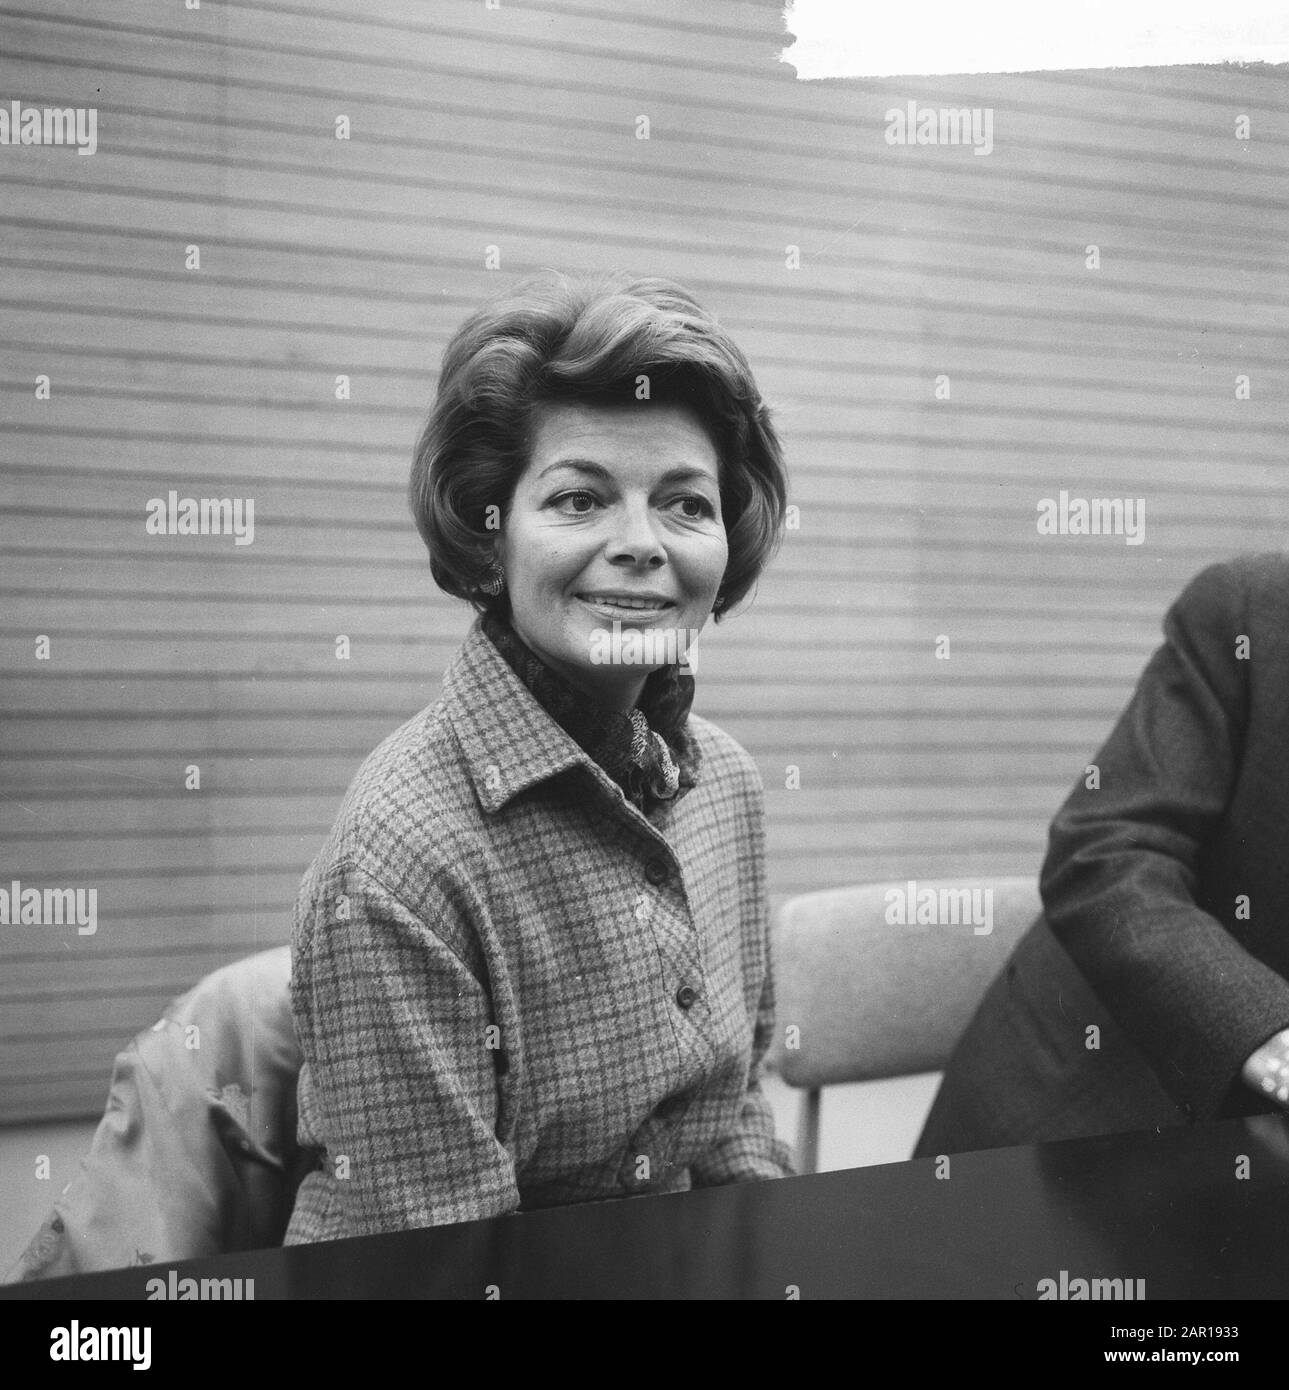 Lys Assia (singer) during press conference at Schiphol (headline) Date: 4 December 1964 Location: Noord-Holland, Schiphol Keywords: press conferences, singers Personal name: Assia, Lys Stock Photo